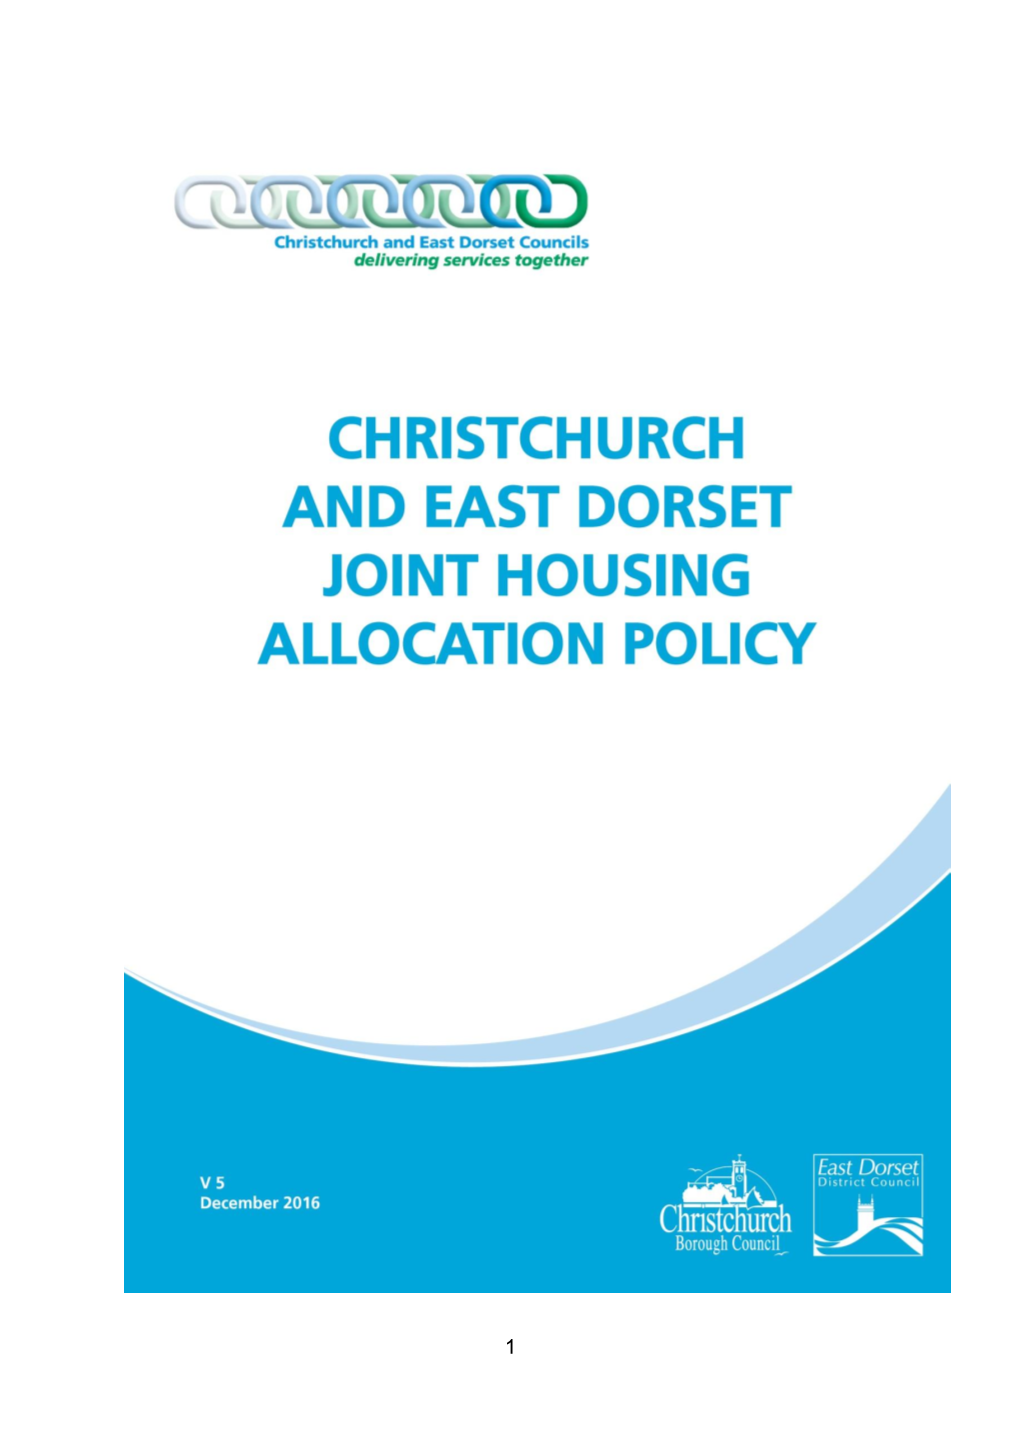 Christchurch Borough Council and East Dorset District Council Housing Allocation Policy